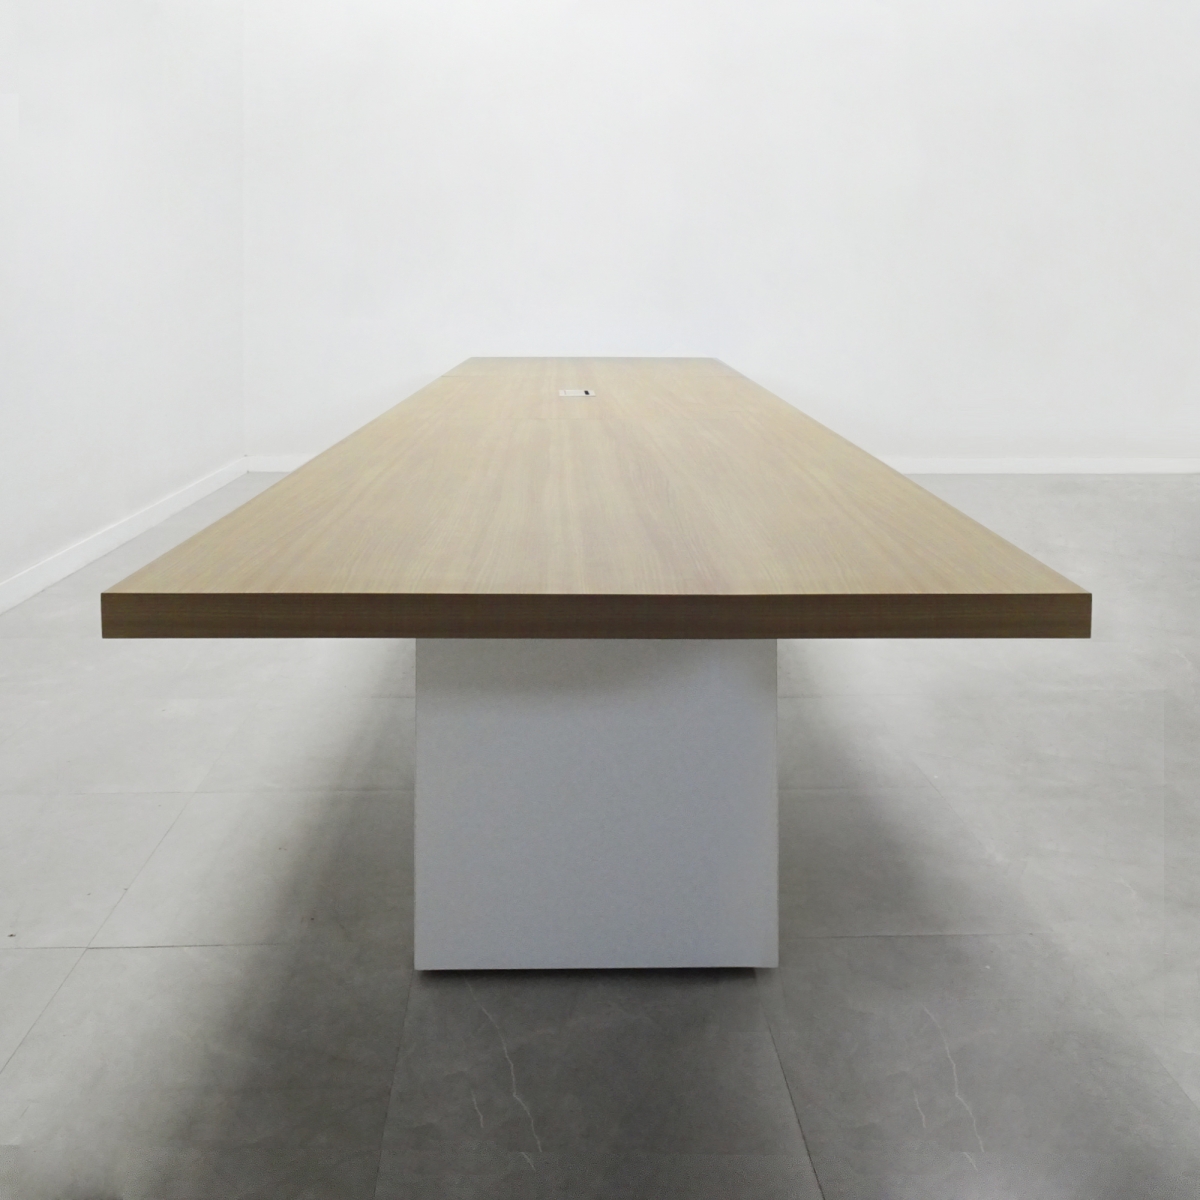 Axis Rectangular Conference Table With Laminate Top